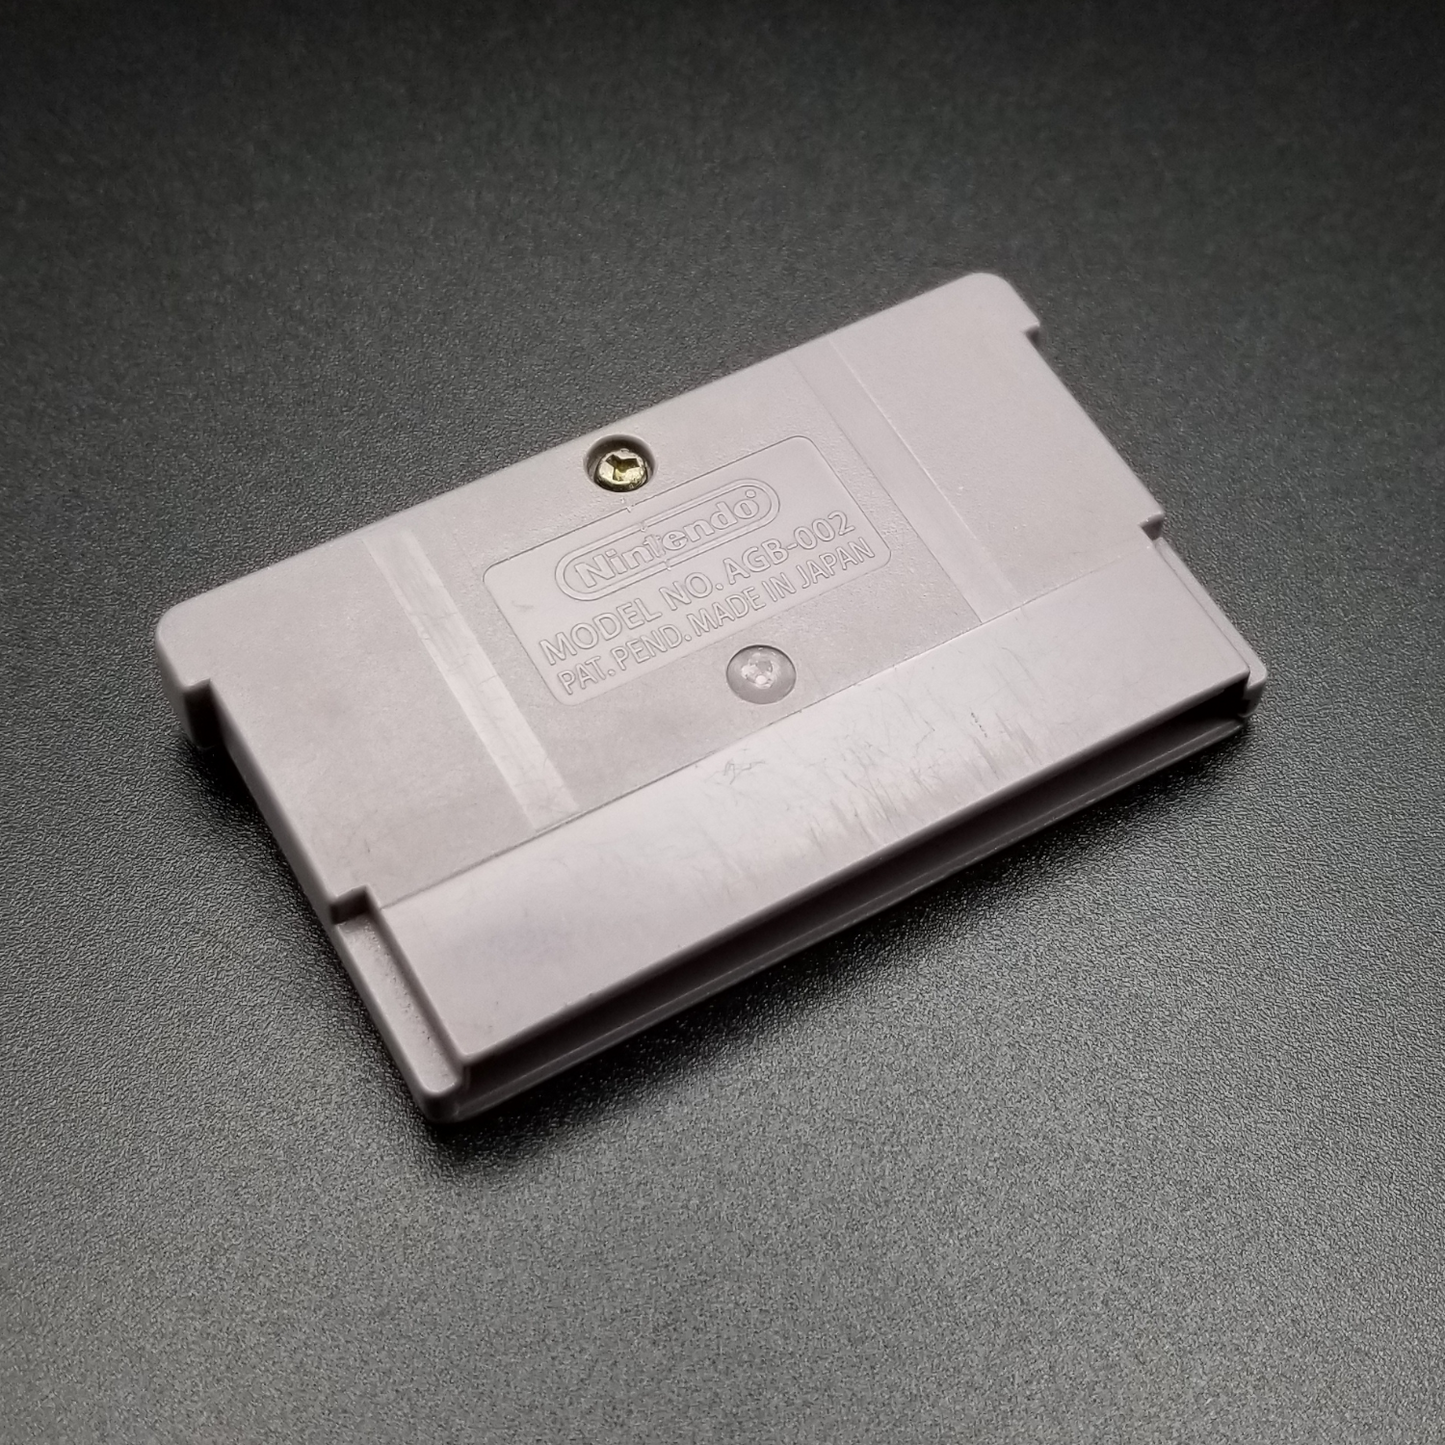 OUTLET - "Classic NES Series: The Legend of Zelda" Gameboy Advance game cartridge